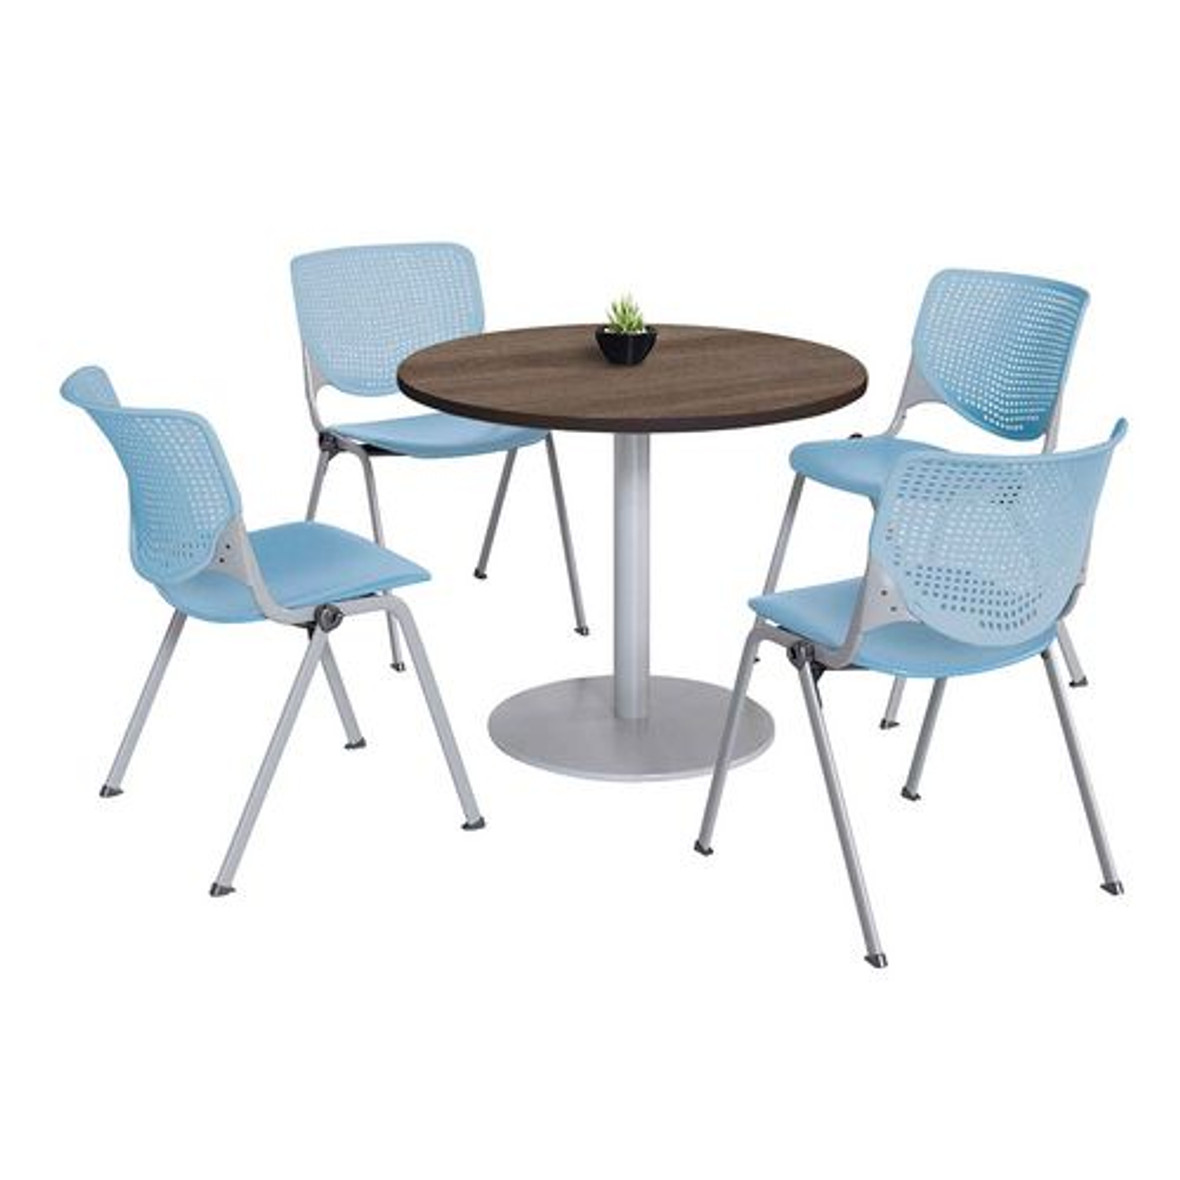 KFI Studios Pedestal Table With Four Sky Blue Kool Series Chairs, Round, 36" Dia X 29h, Studio Teak, Ships In 4-6 Business Days